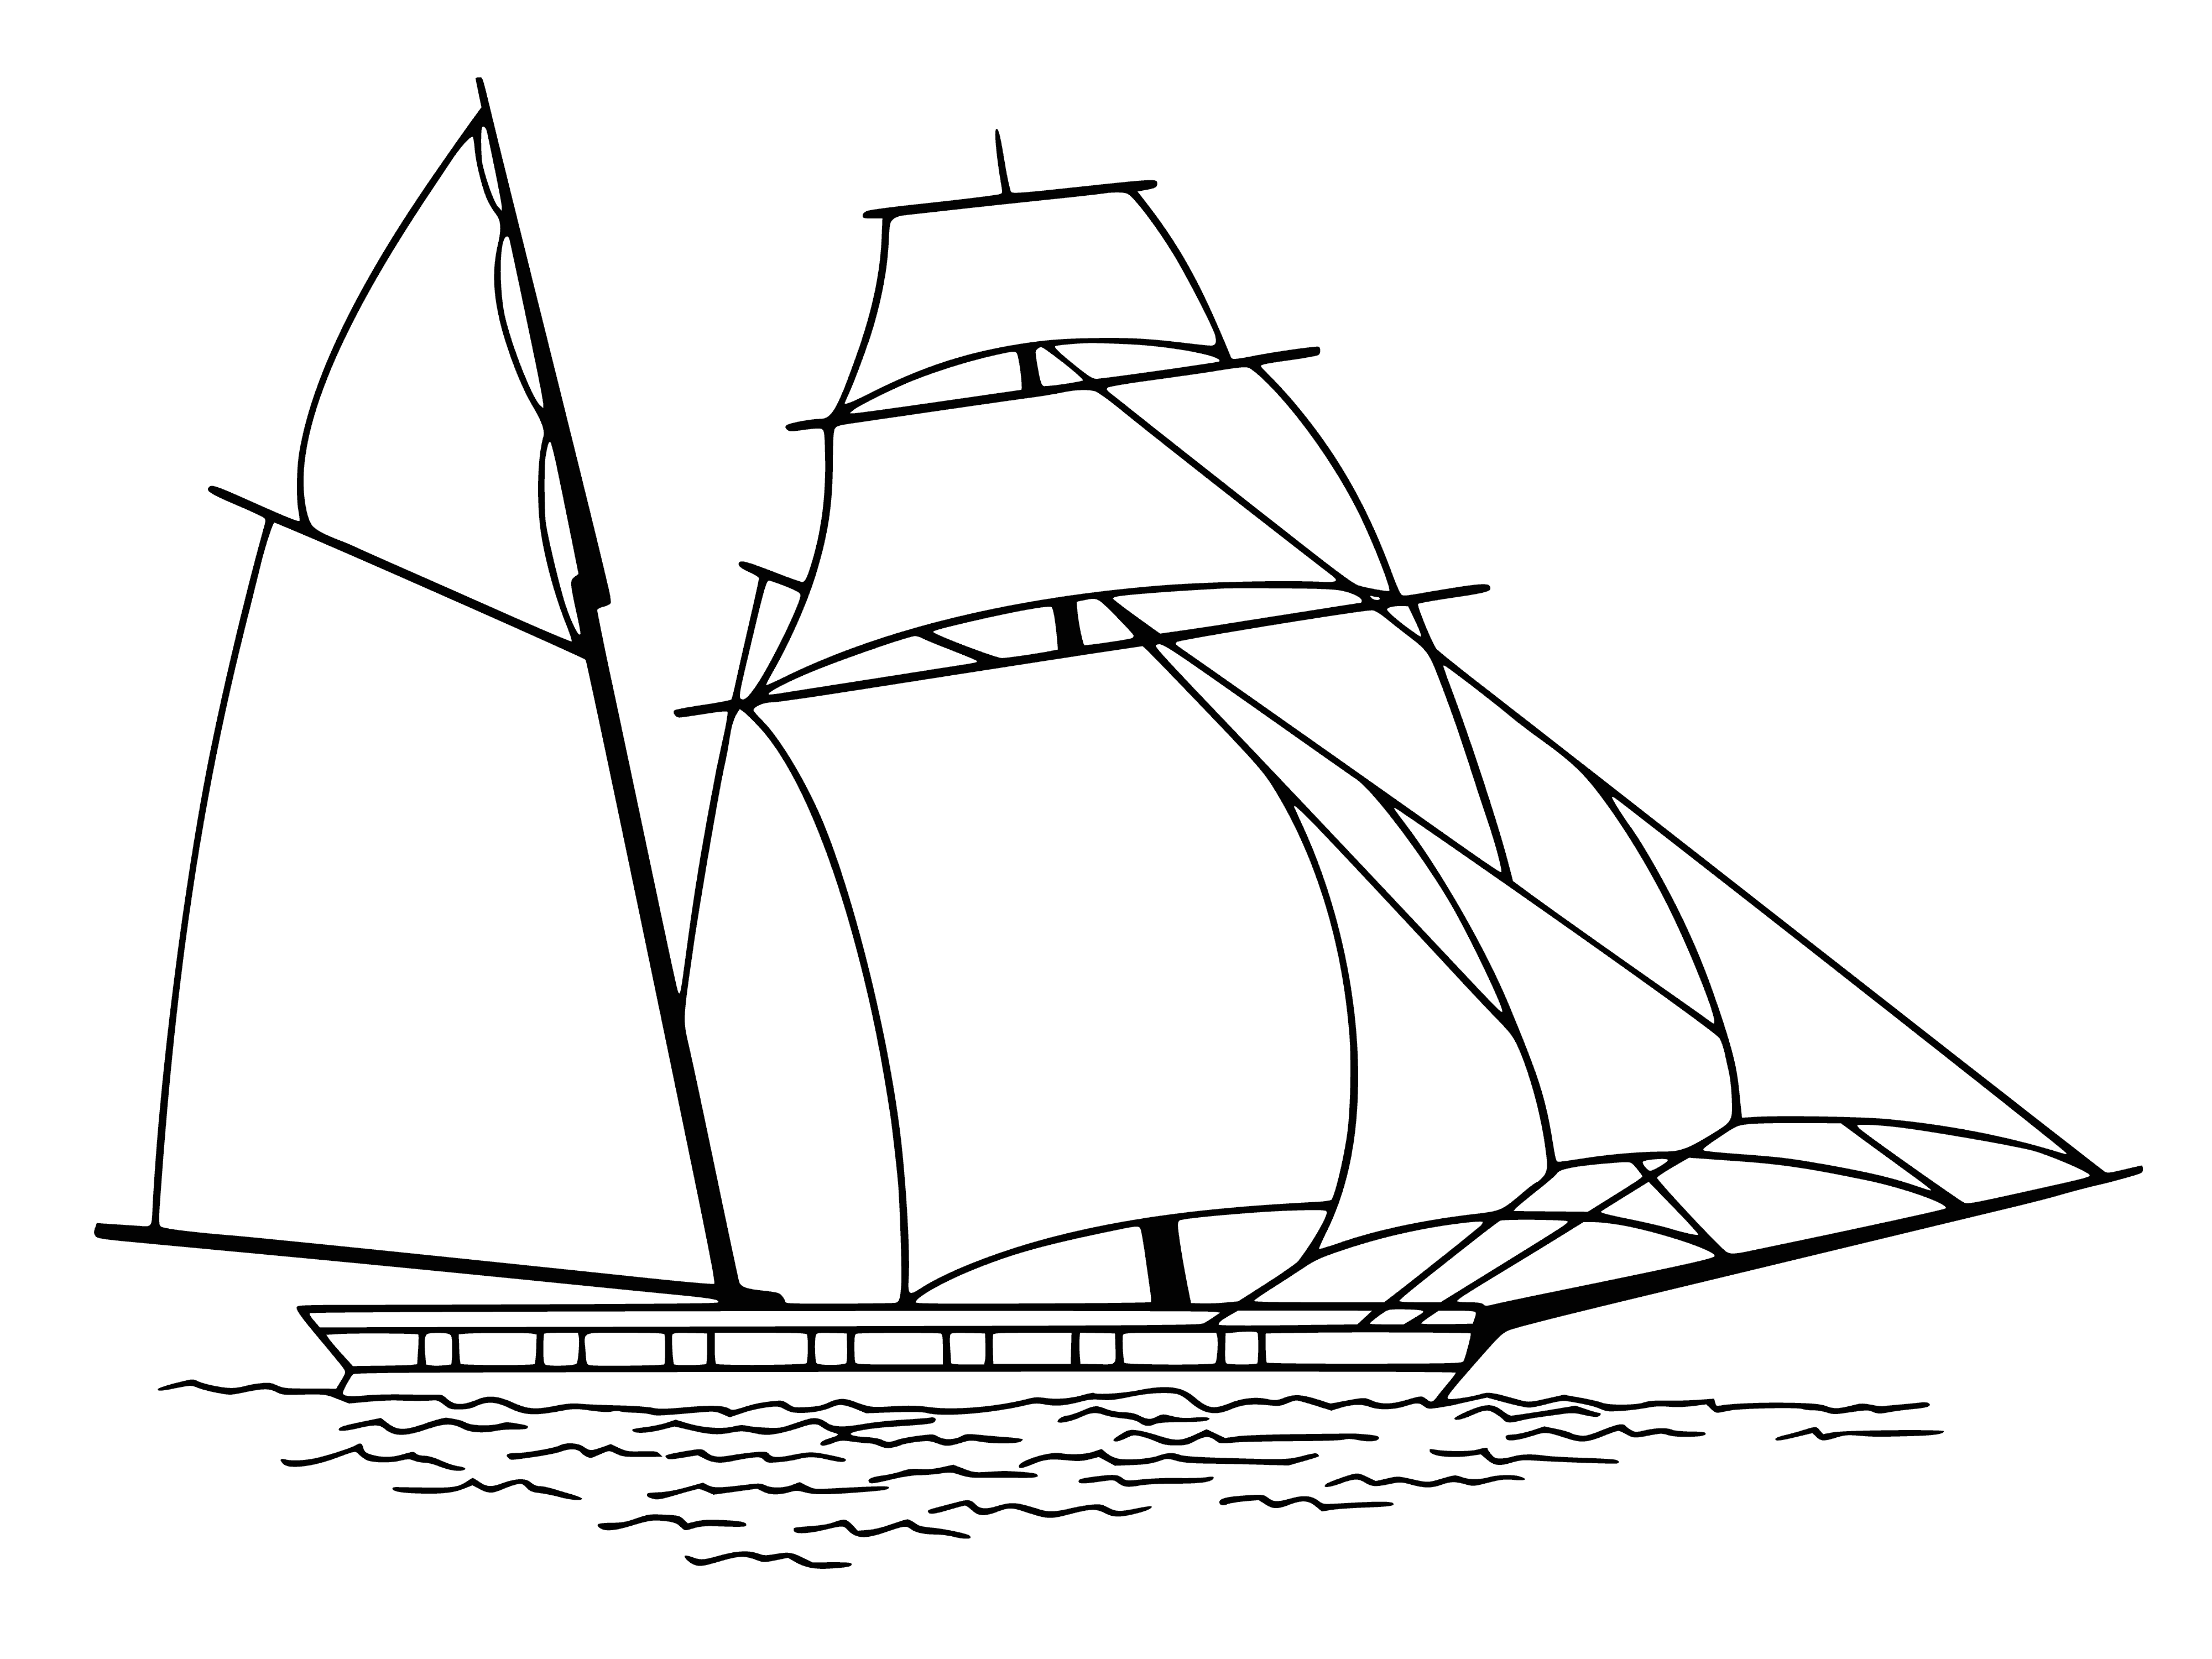 coloring page: 140 characters: A large sailing vessel is in the water, sailing with many sails propelled by the wind, a beautiful sight.